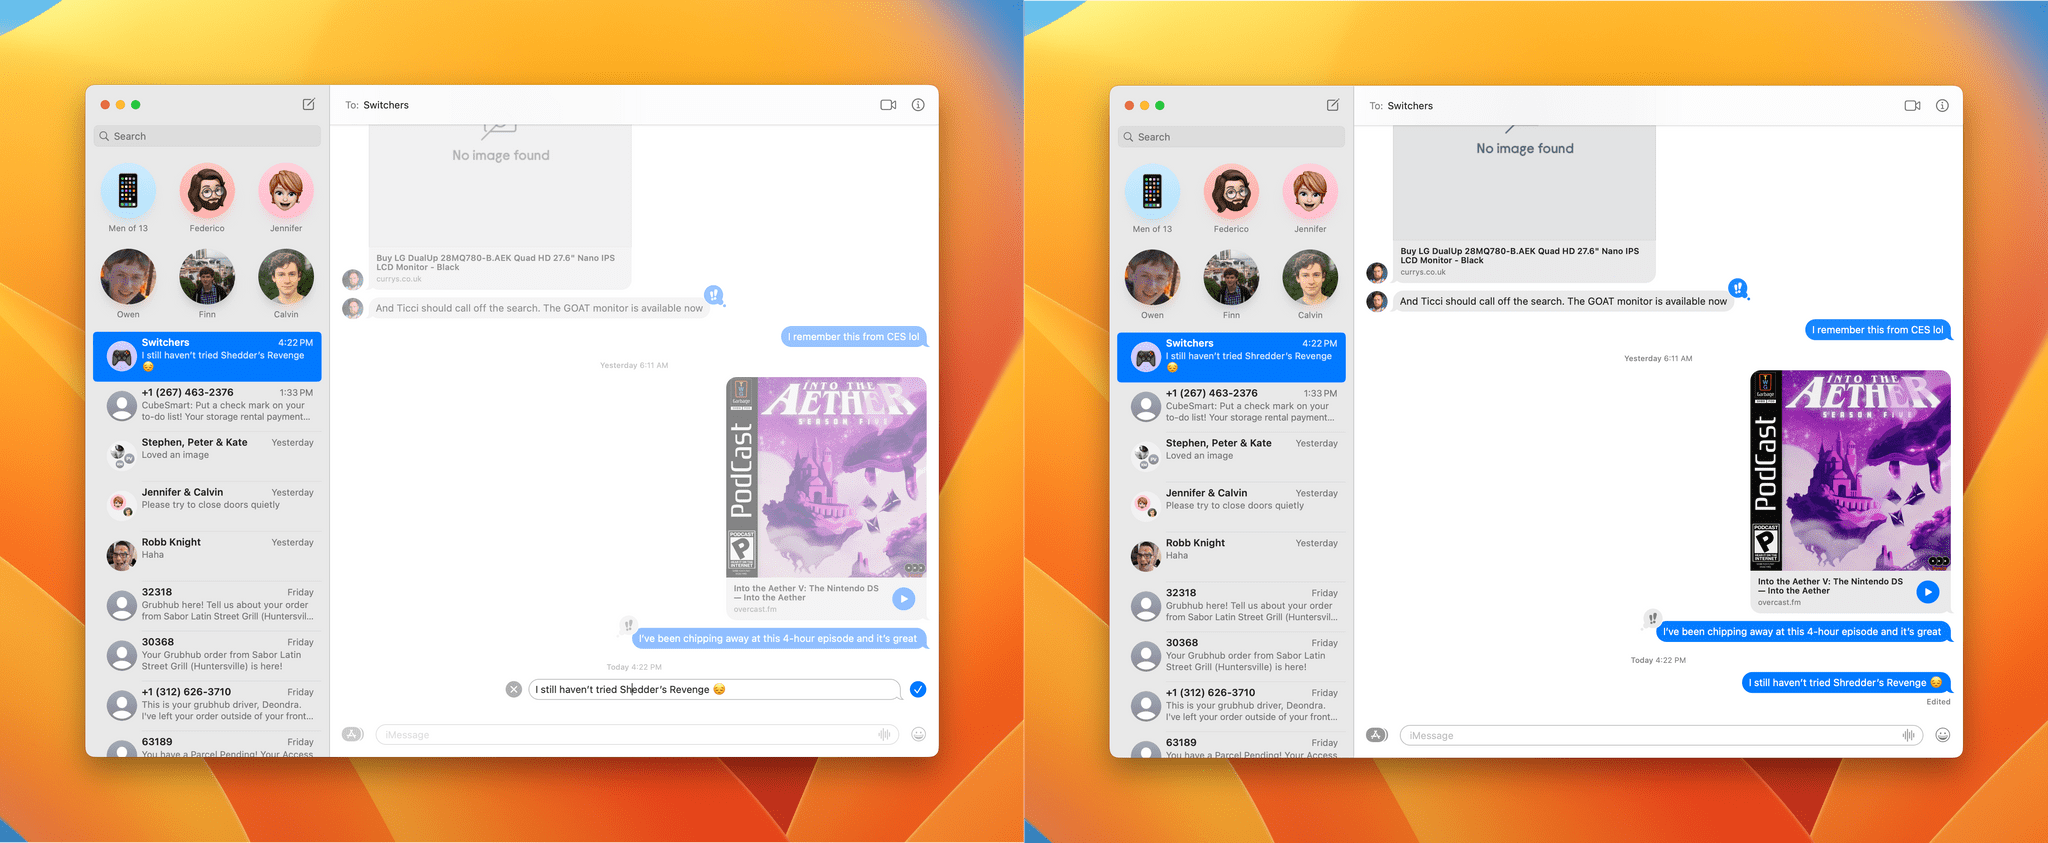 You can now edit messages within 15 minutes of sending them.